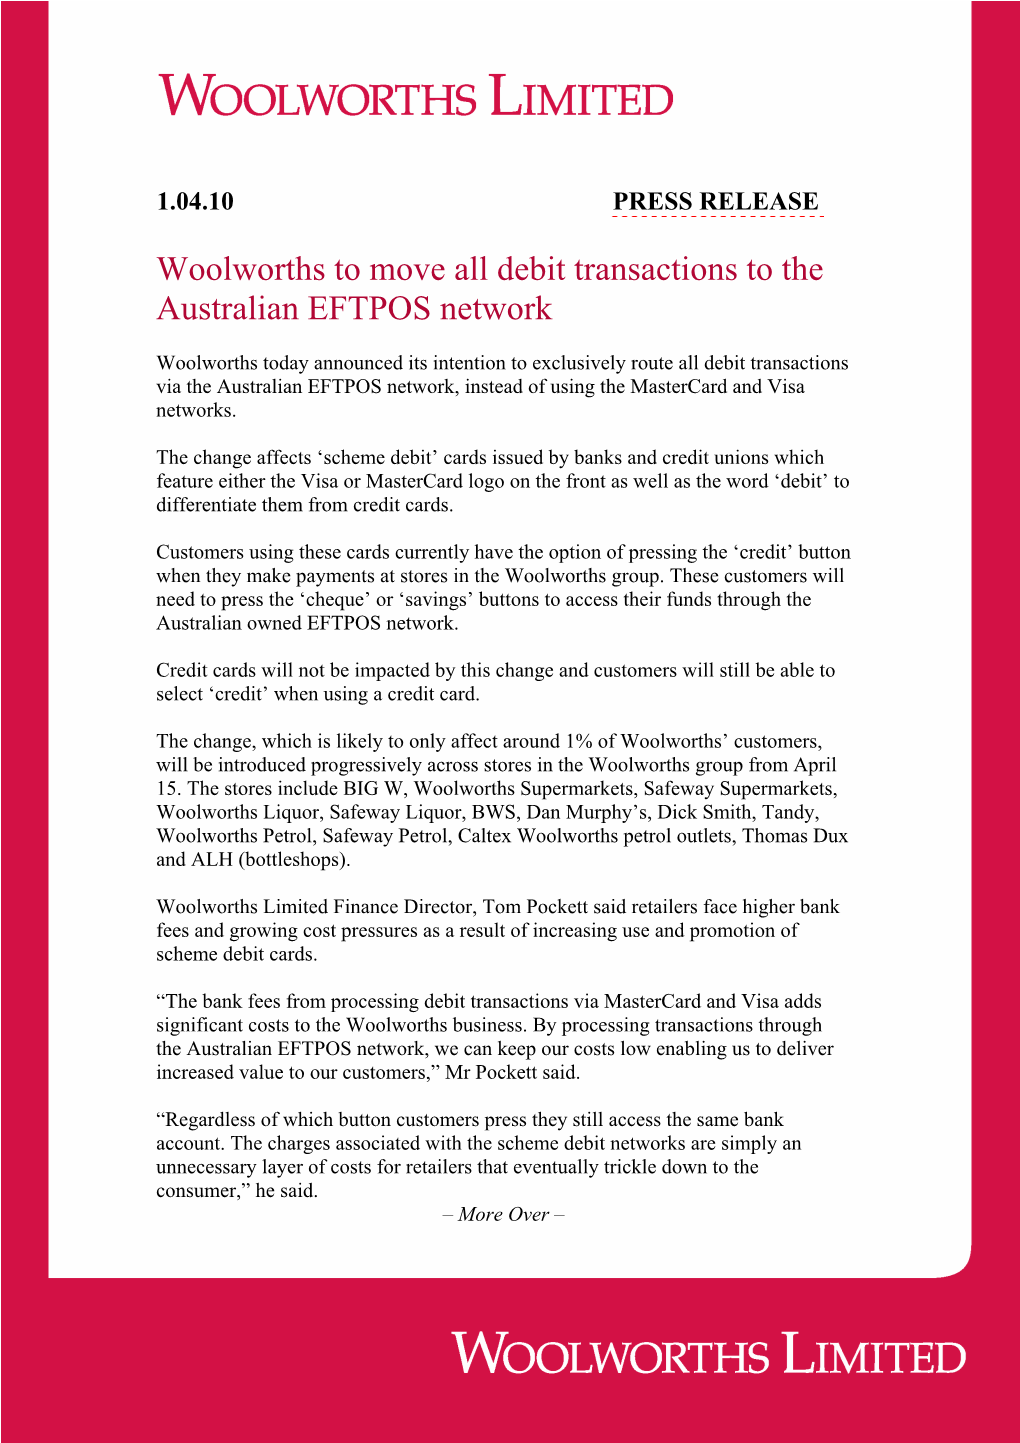 Woolworths to Move All Debit Transactions to the Australian EFTPOS Network